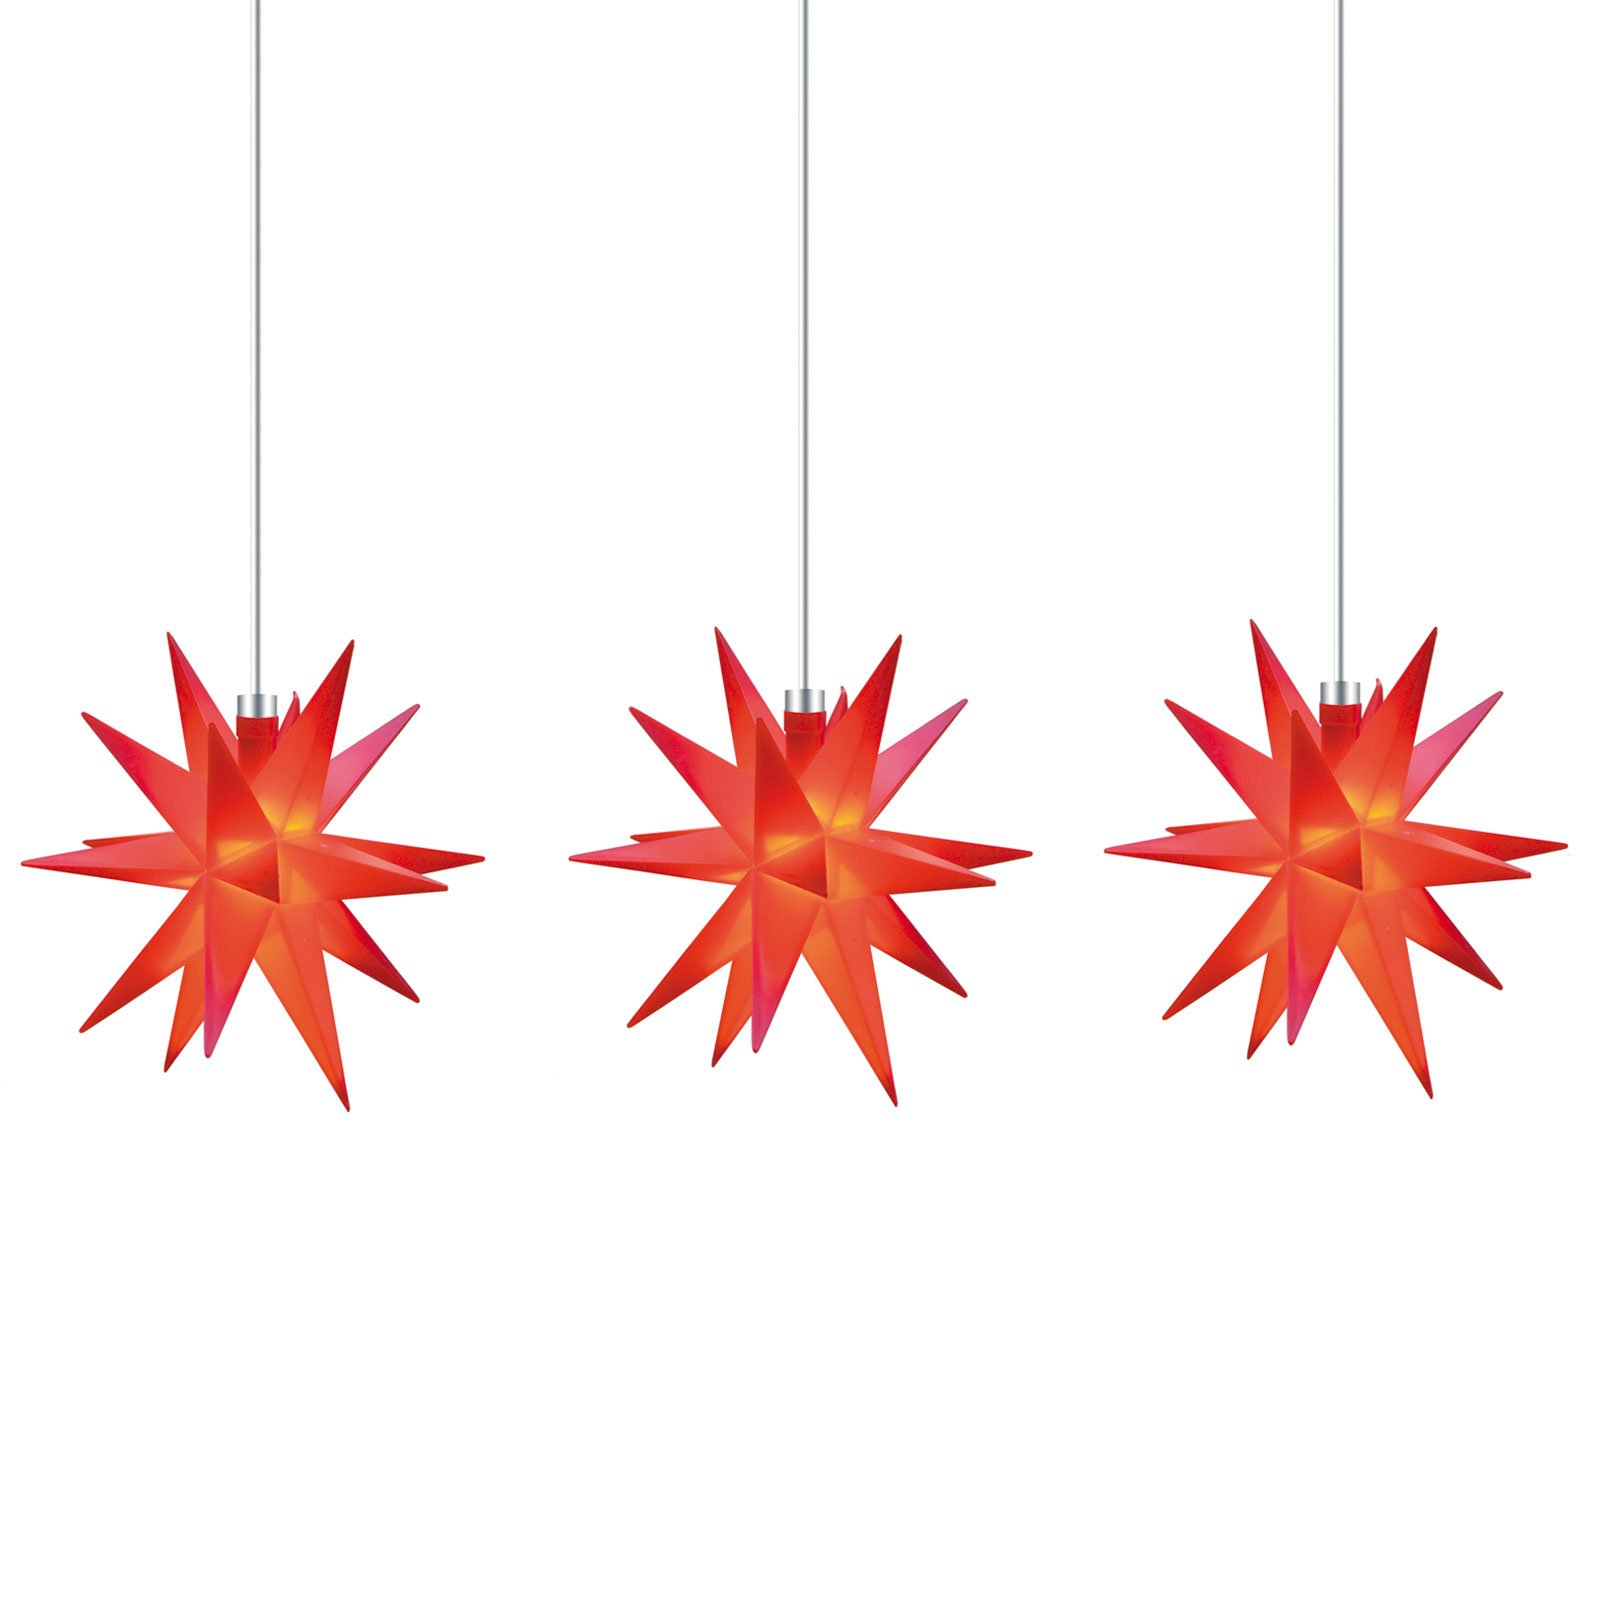 Star 18-pointed string lights, 3-bulb, red